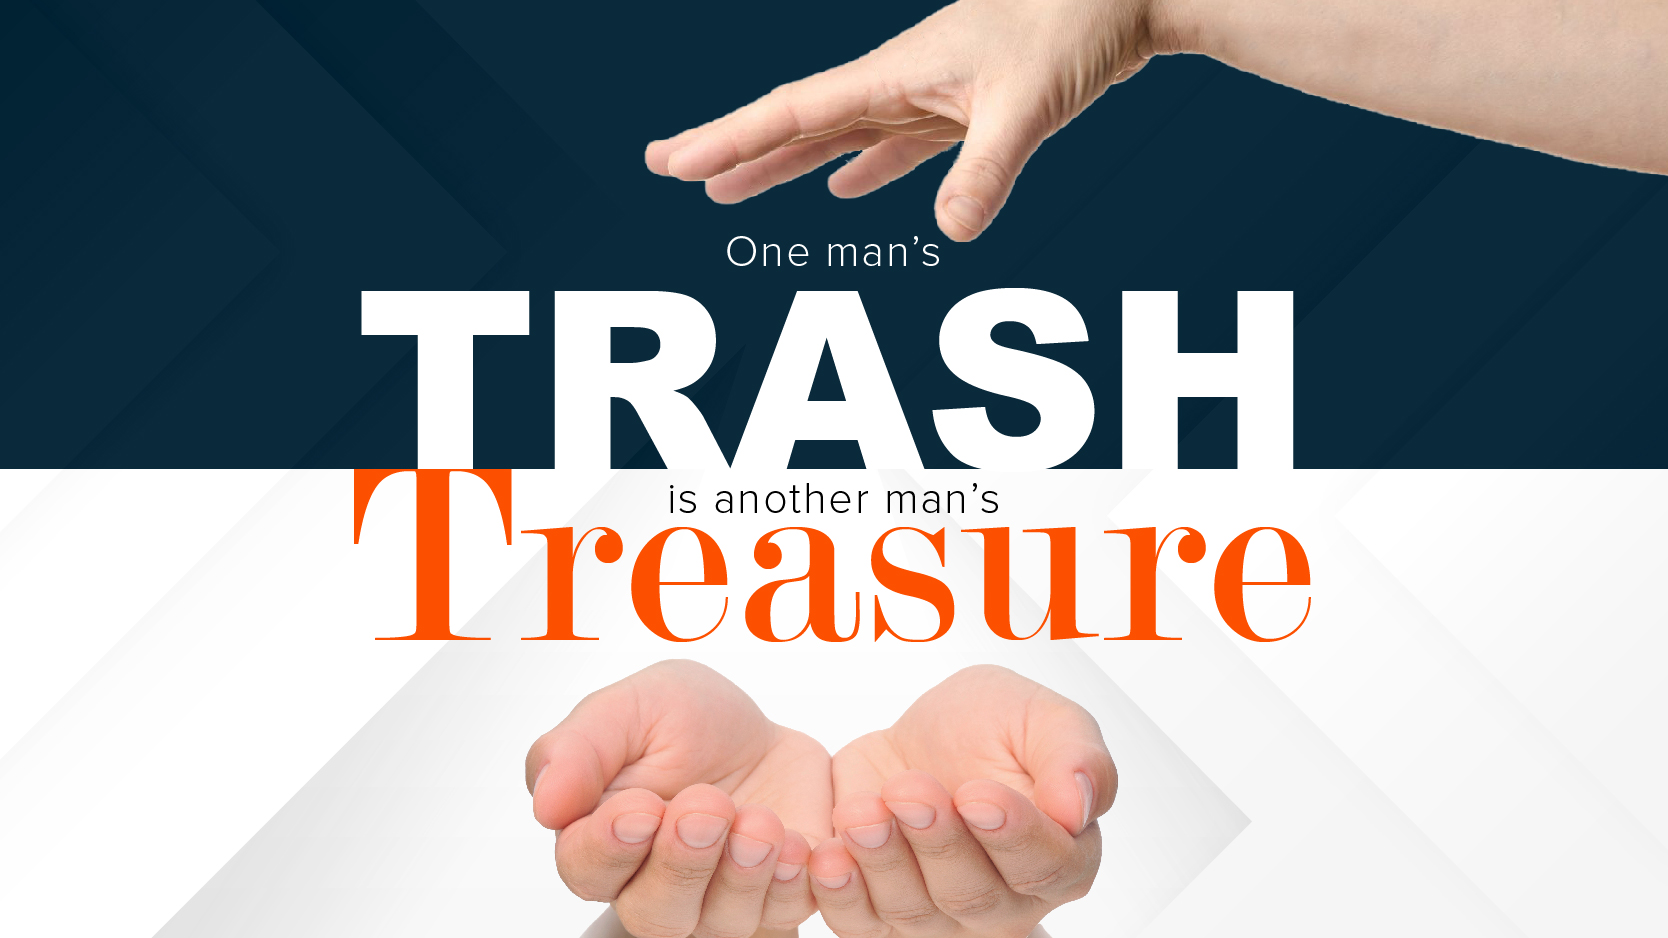 One man’s trash is another man’s treasure!